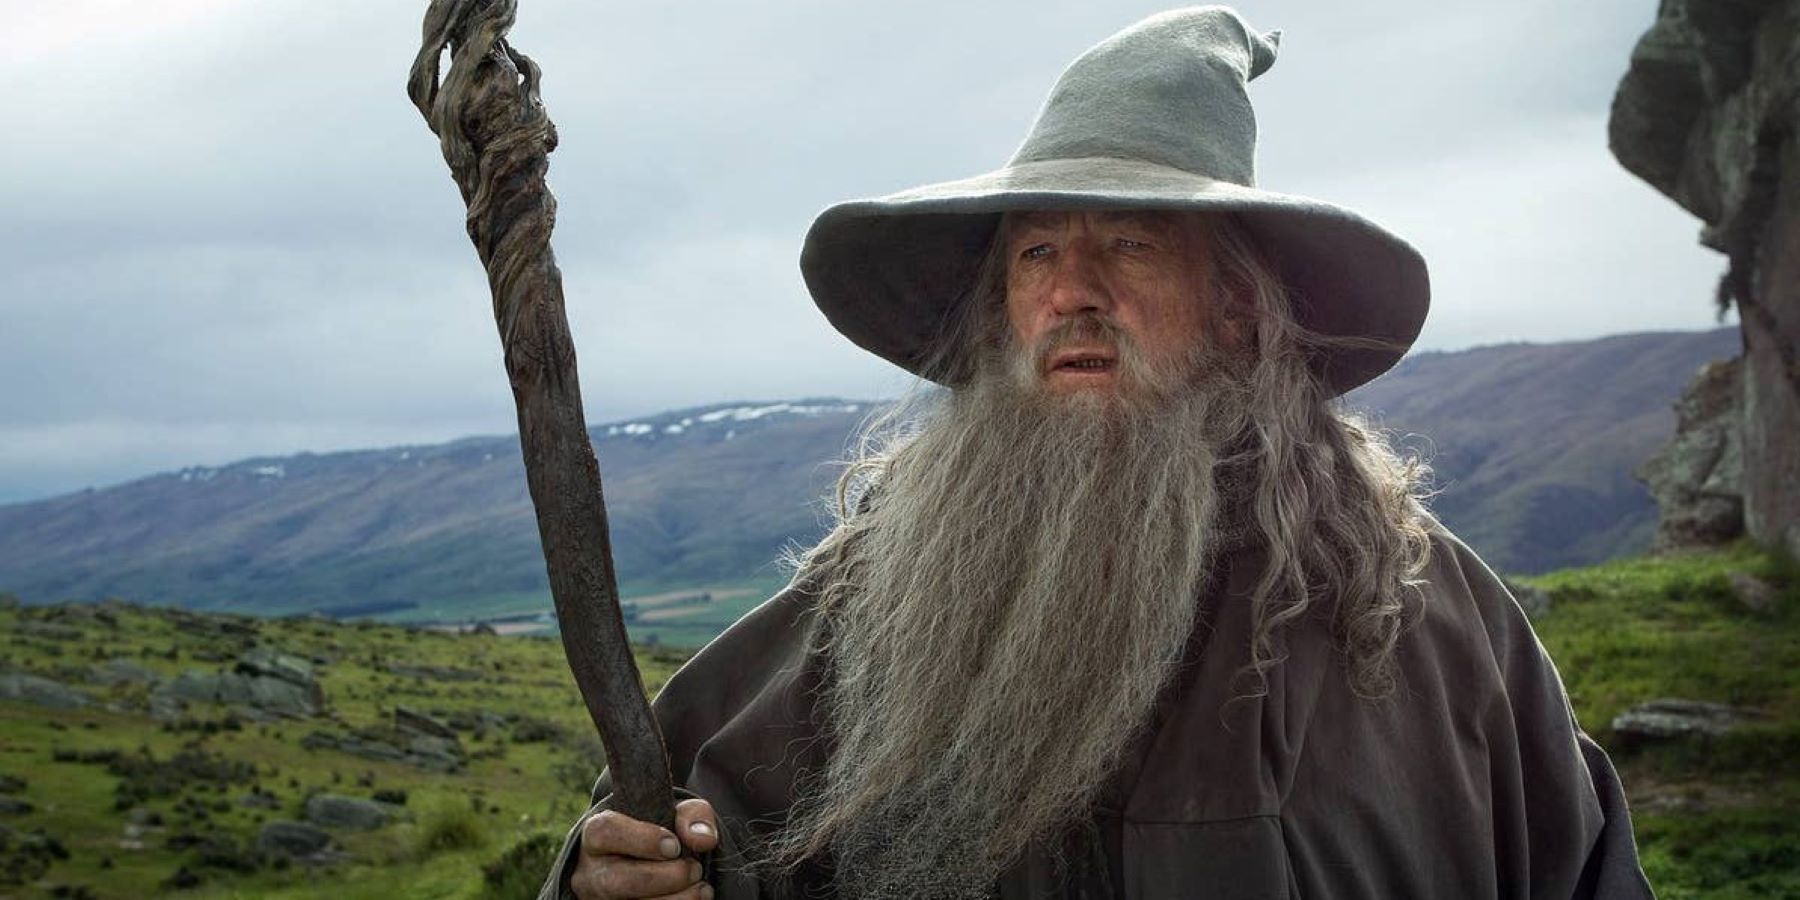 Ian McKellen's Gandalf frowning and holding his staff in The Hobbit